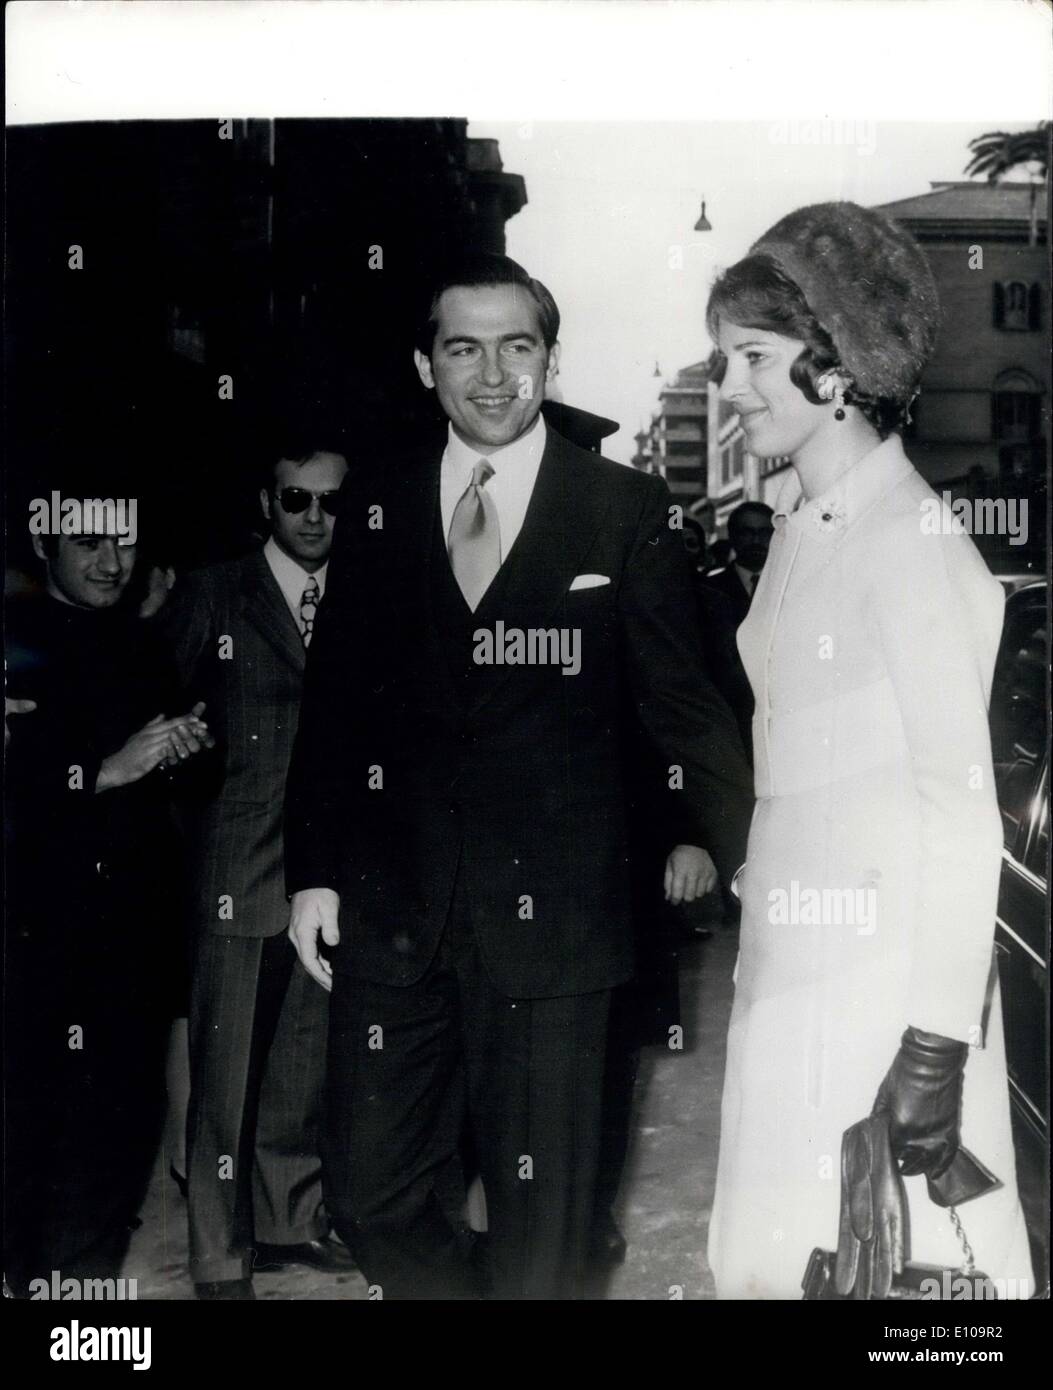 Mar. 28, 1970 - King Constantine And Queen Anne Marie Attend Special Service In Rome To Celebrate Greek Independence: King Constantine and Queen Anne Marie of Greece attended the ''Te Duem held at the Church of St. Andrew in Rome on the occasion of Greek Independence Day. They are pictured arriving for the service. Stock Photo